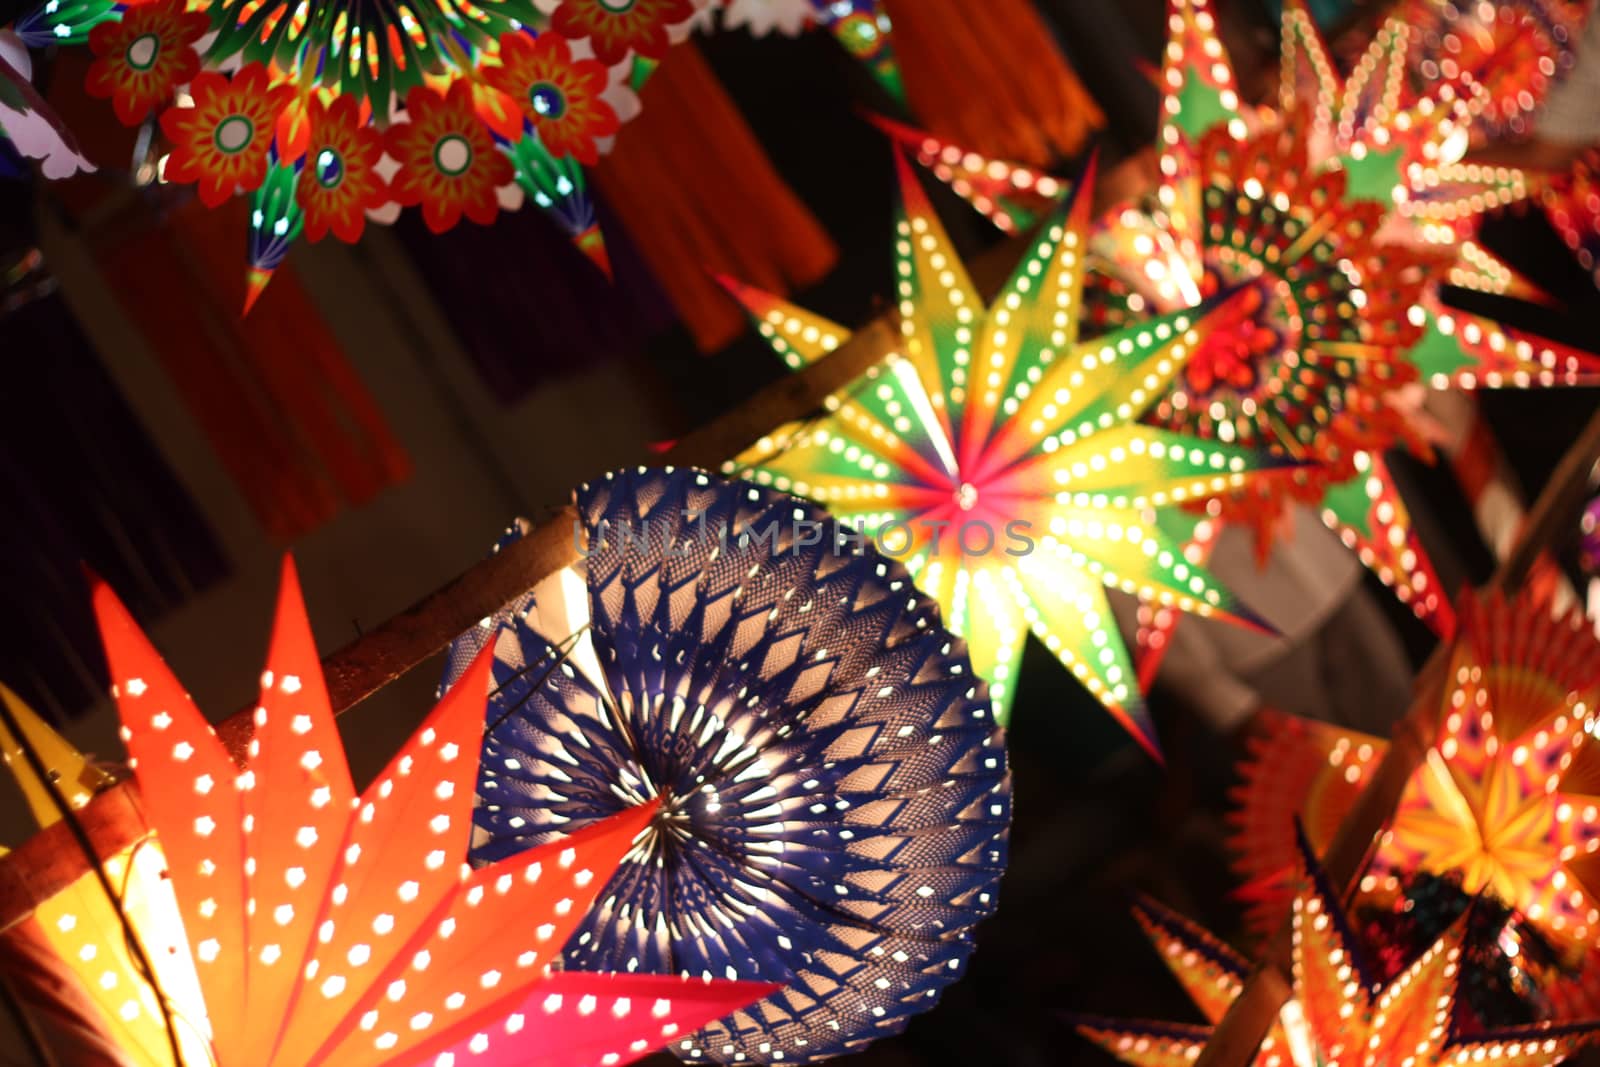 A line of different lanterns for sale in India on the festive occasion of Diwali